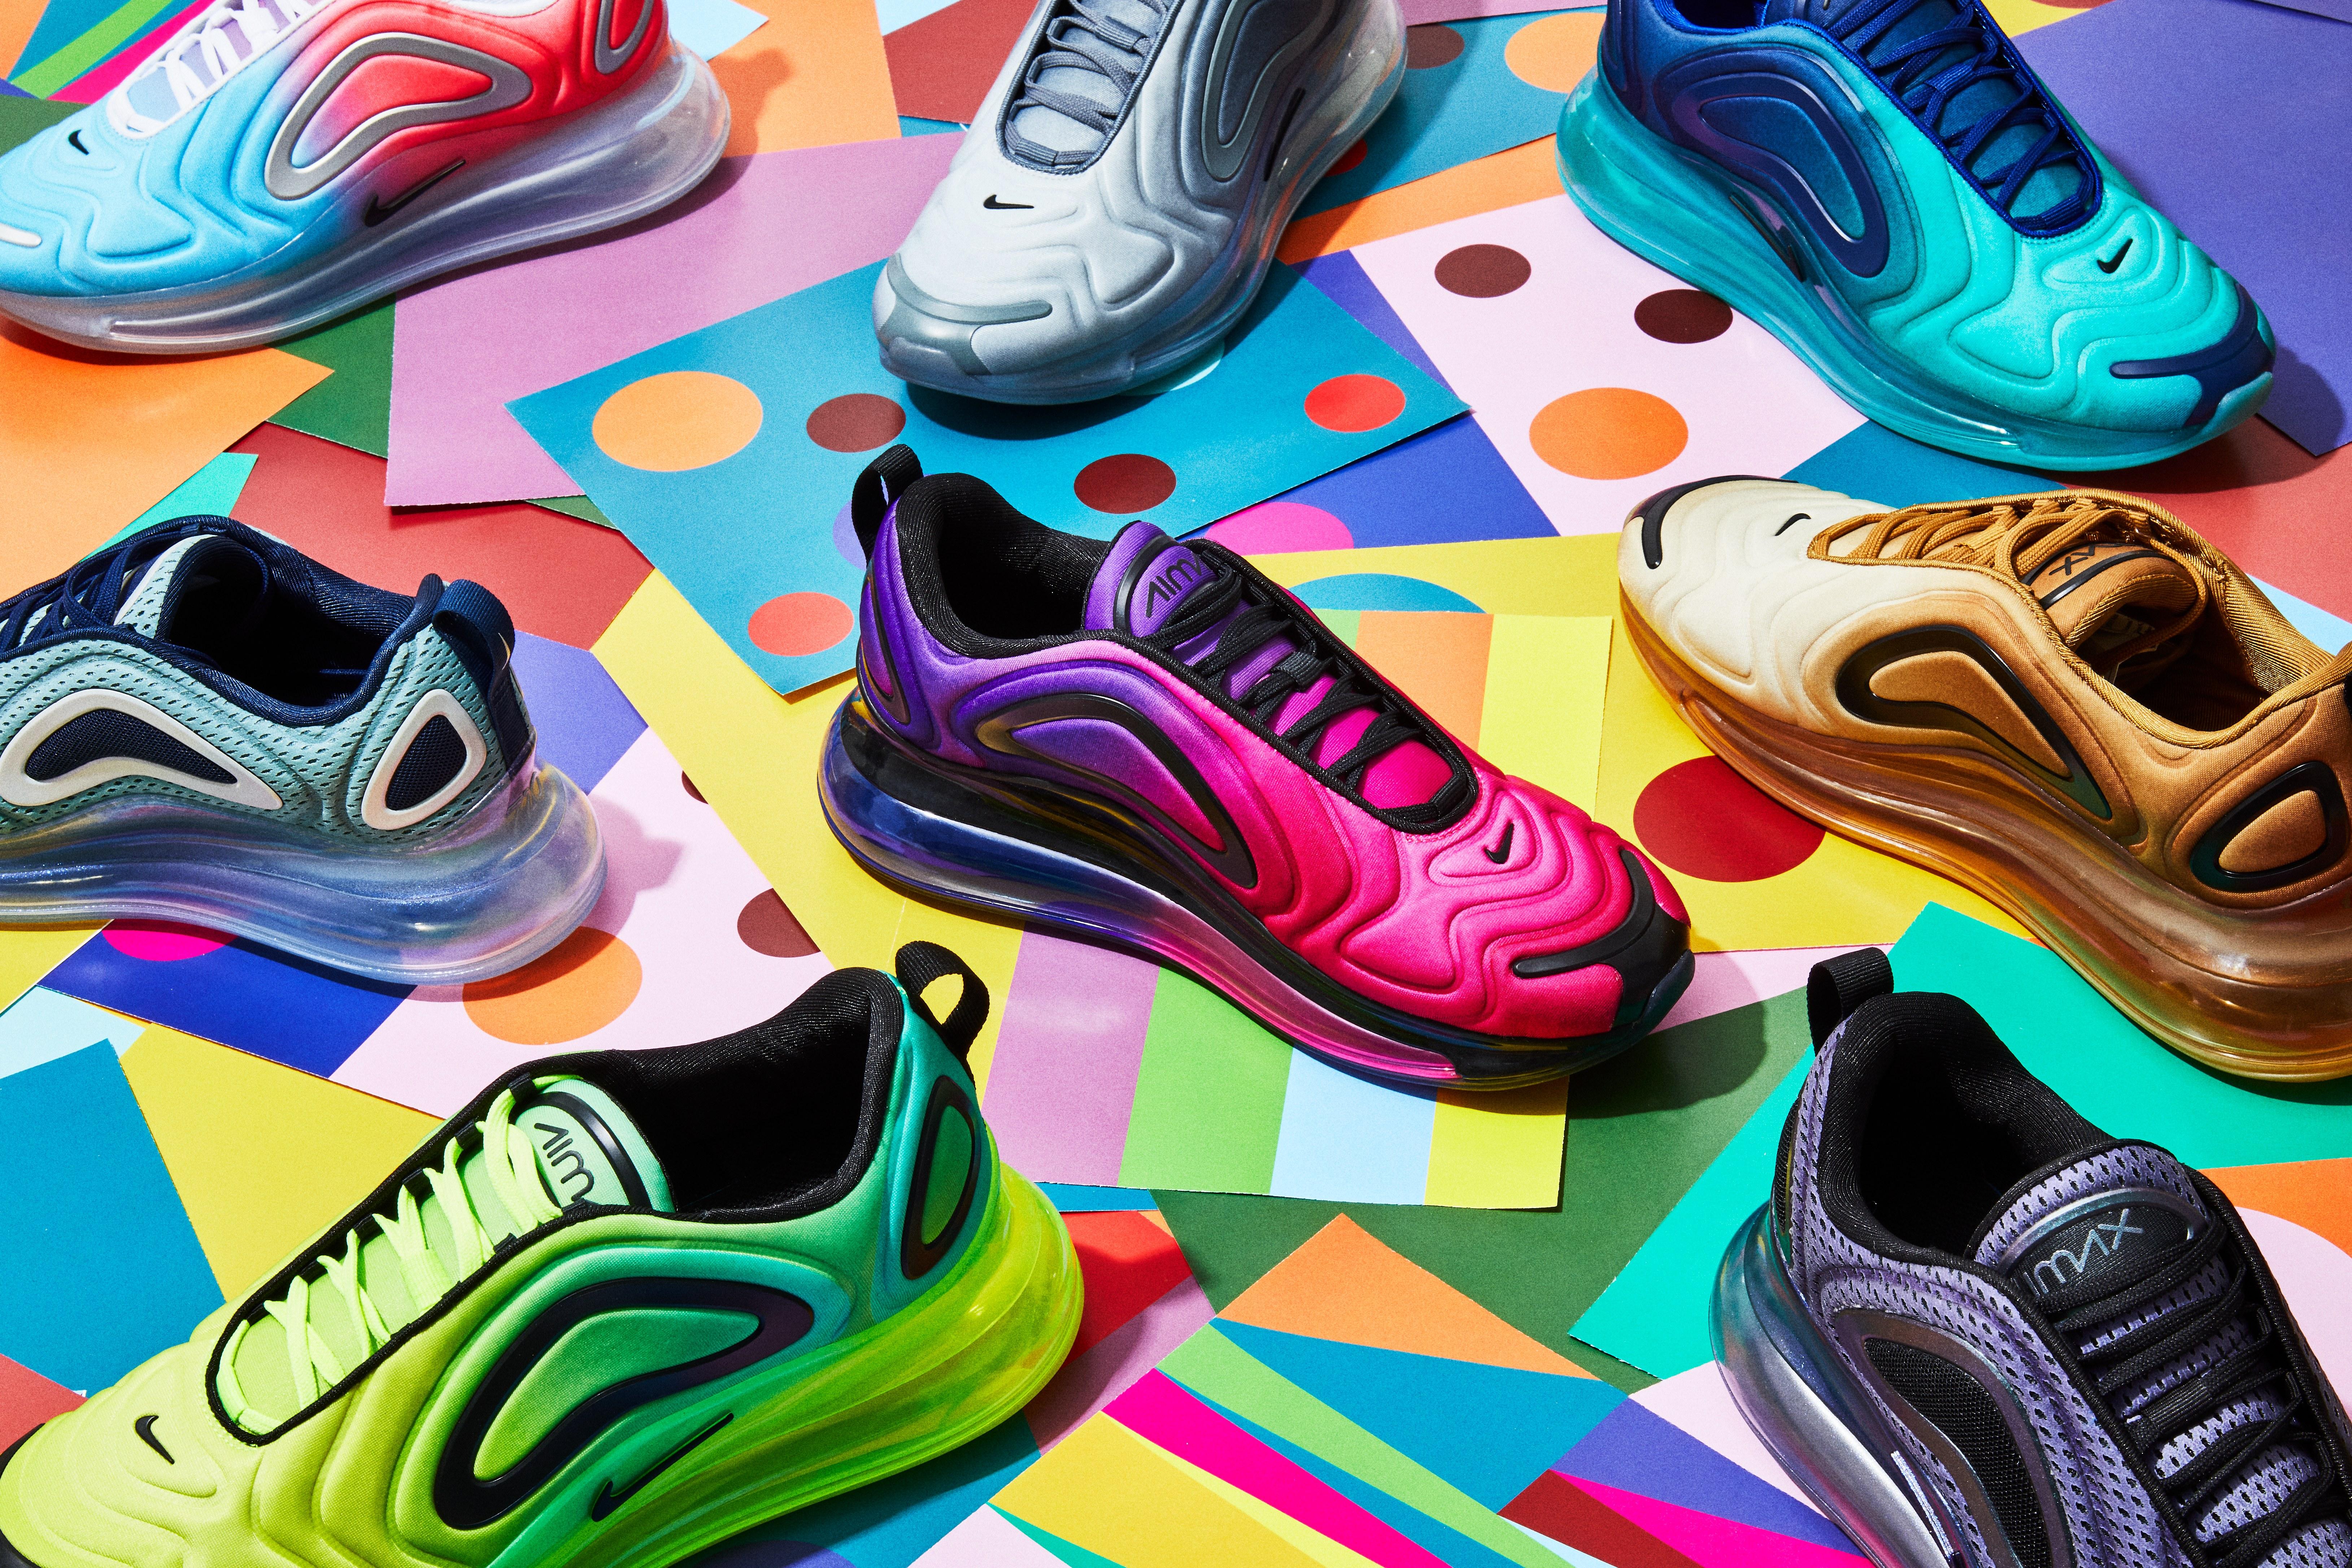 The Nike Air Max 720 Is the Irresistibly Bouncy Shoe